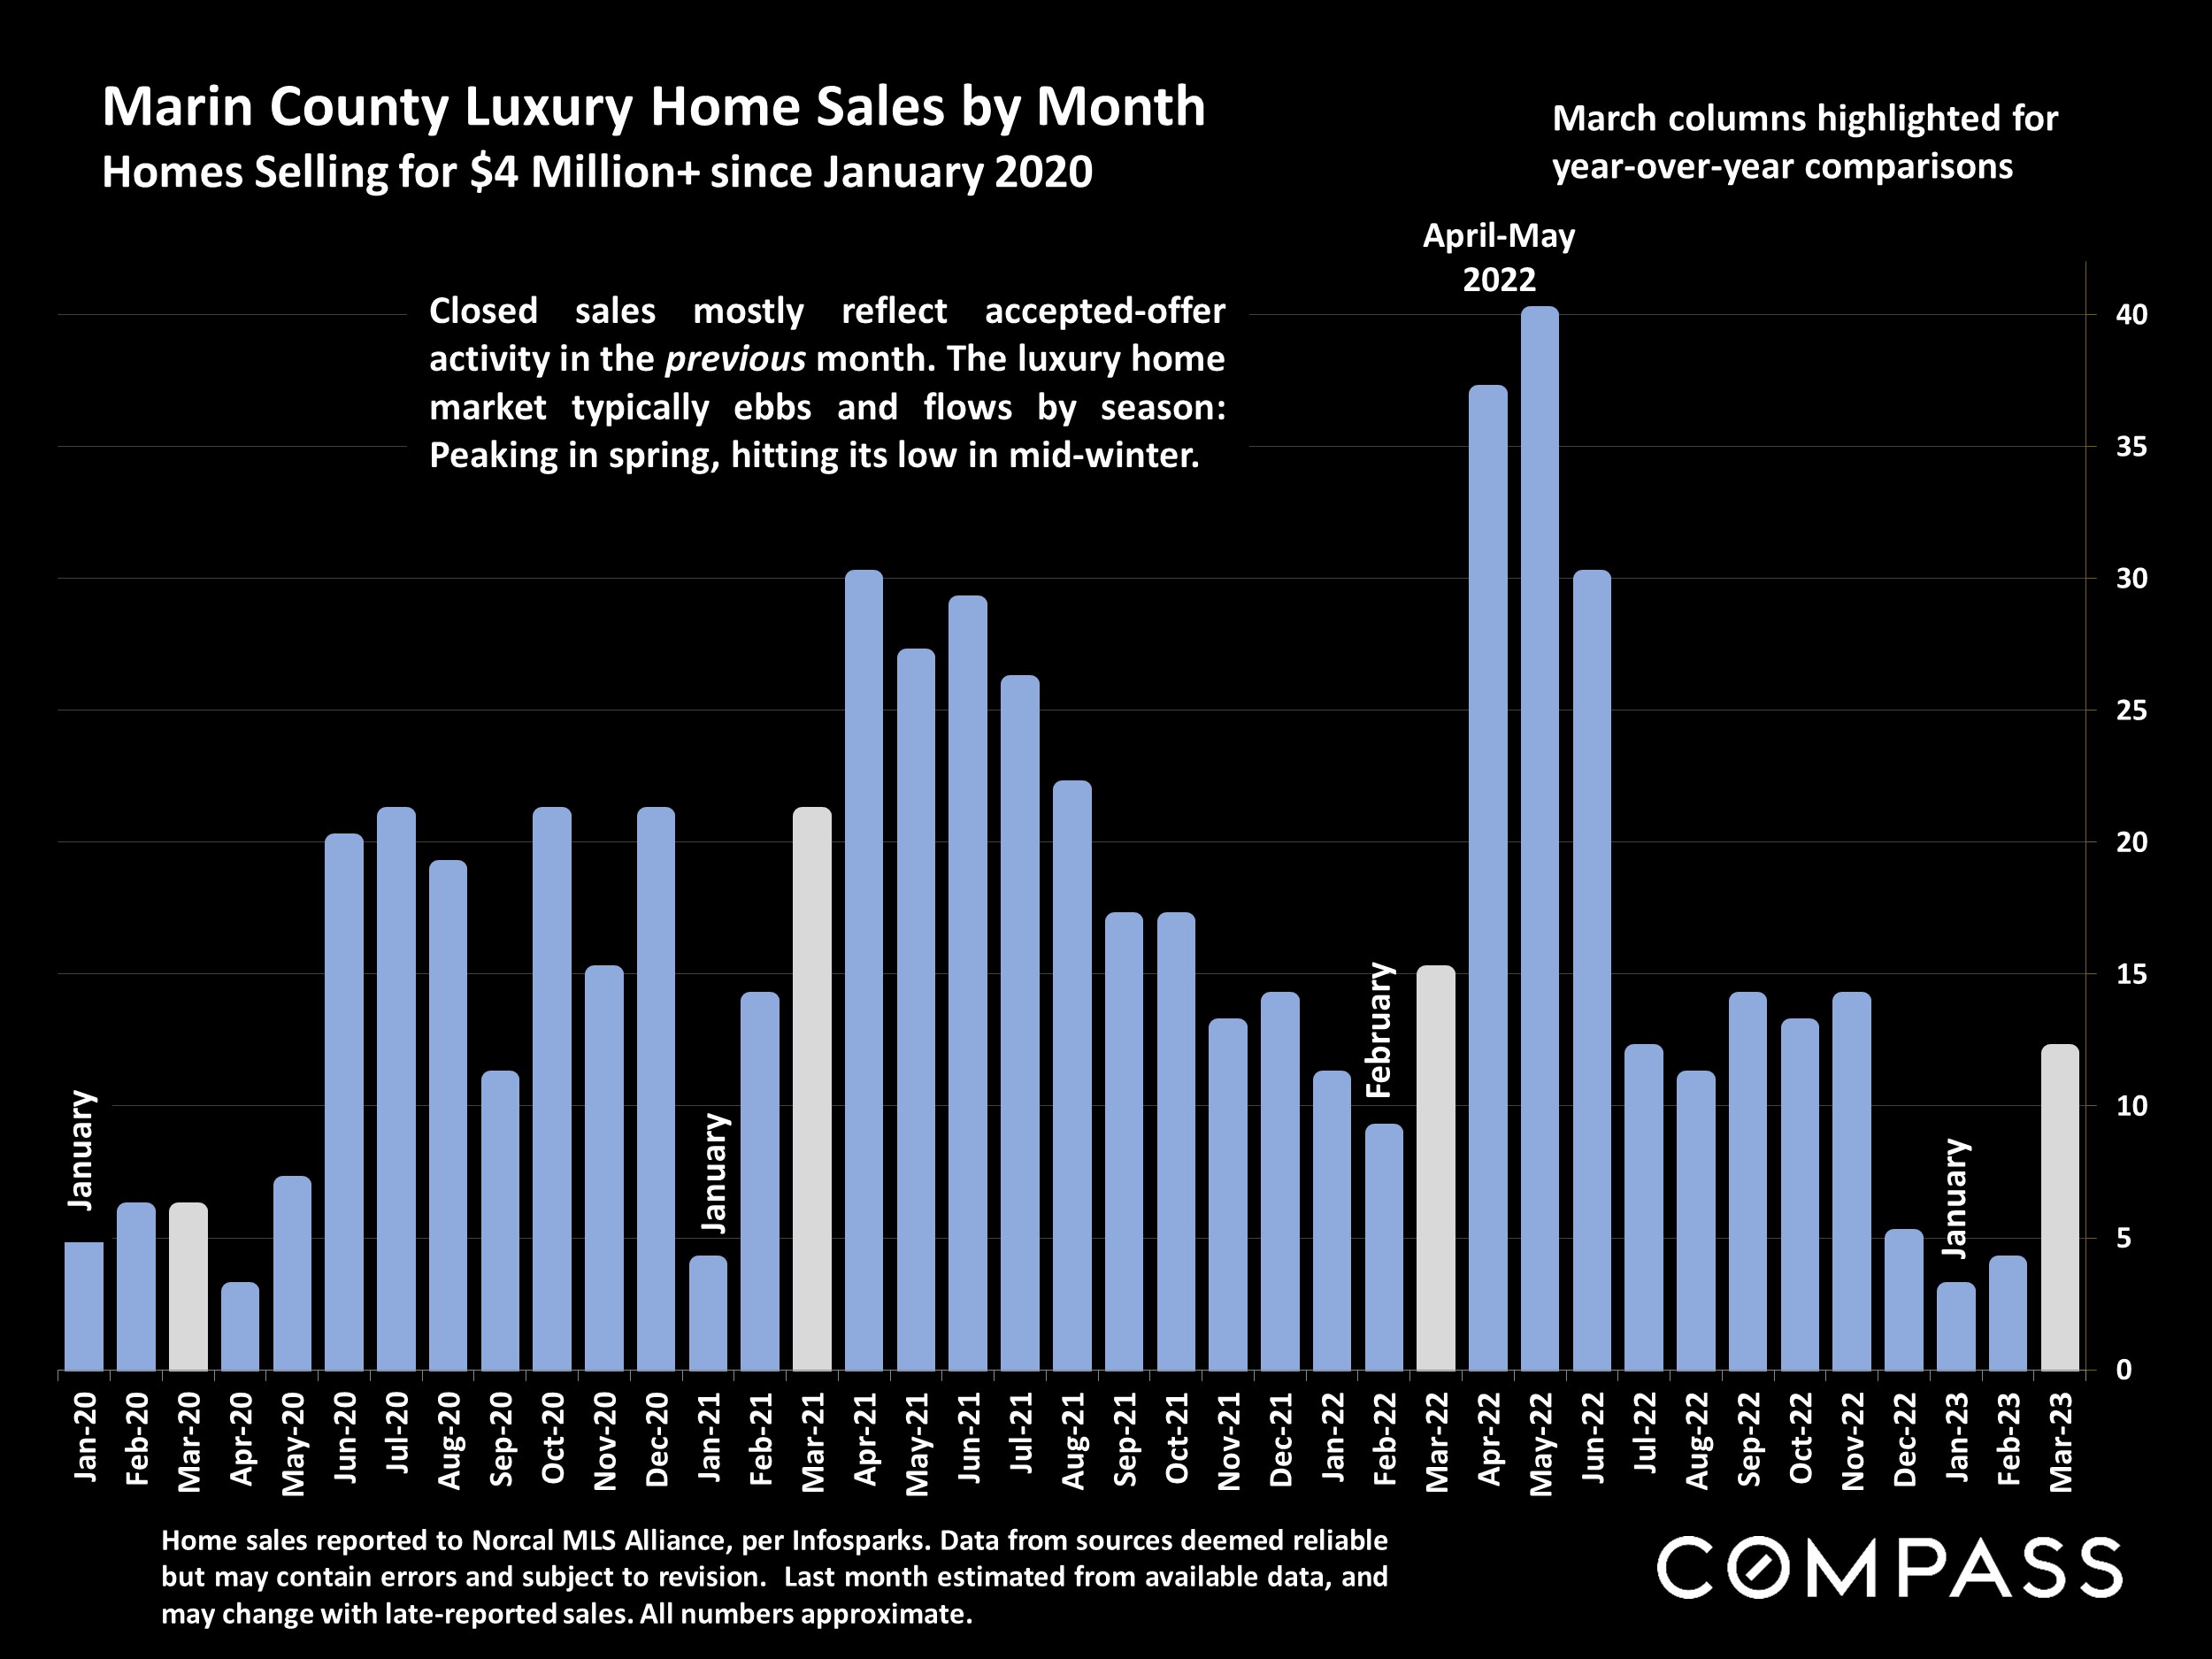 Marin County Luxury Home Sales by Month